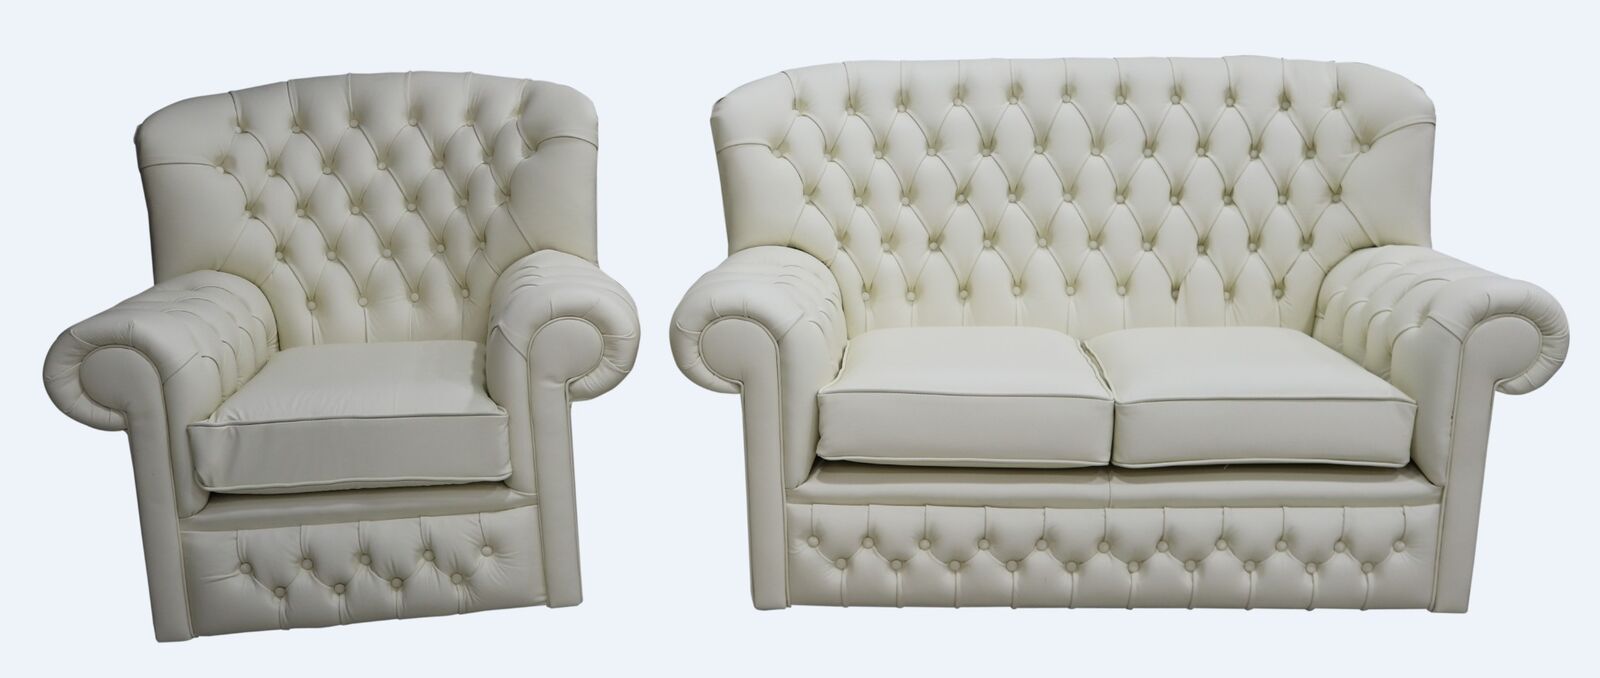 Product photograph of Monks Thomas Chesterfield 2 1 Seater Cottonseed Cream Leather Sofa Suite Offer from Designer Sofas 4U